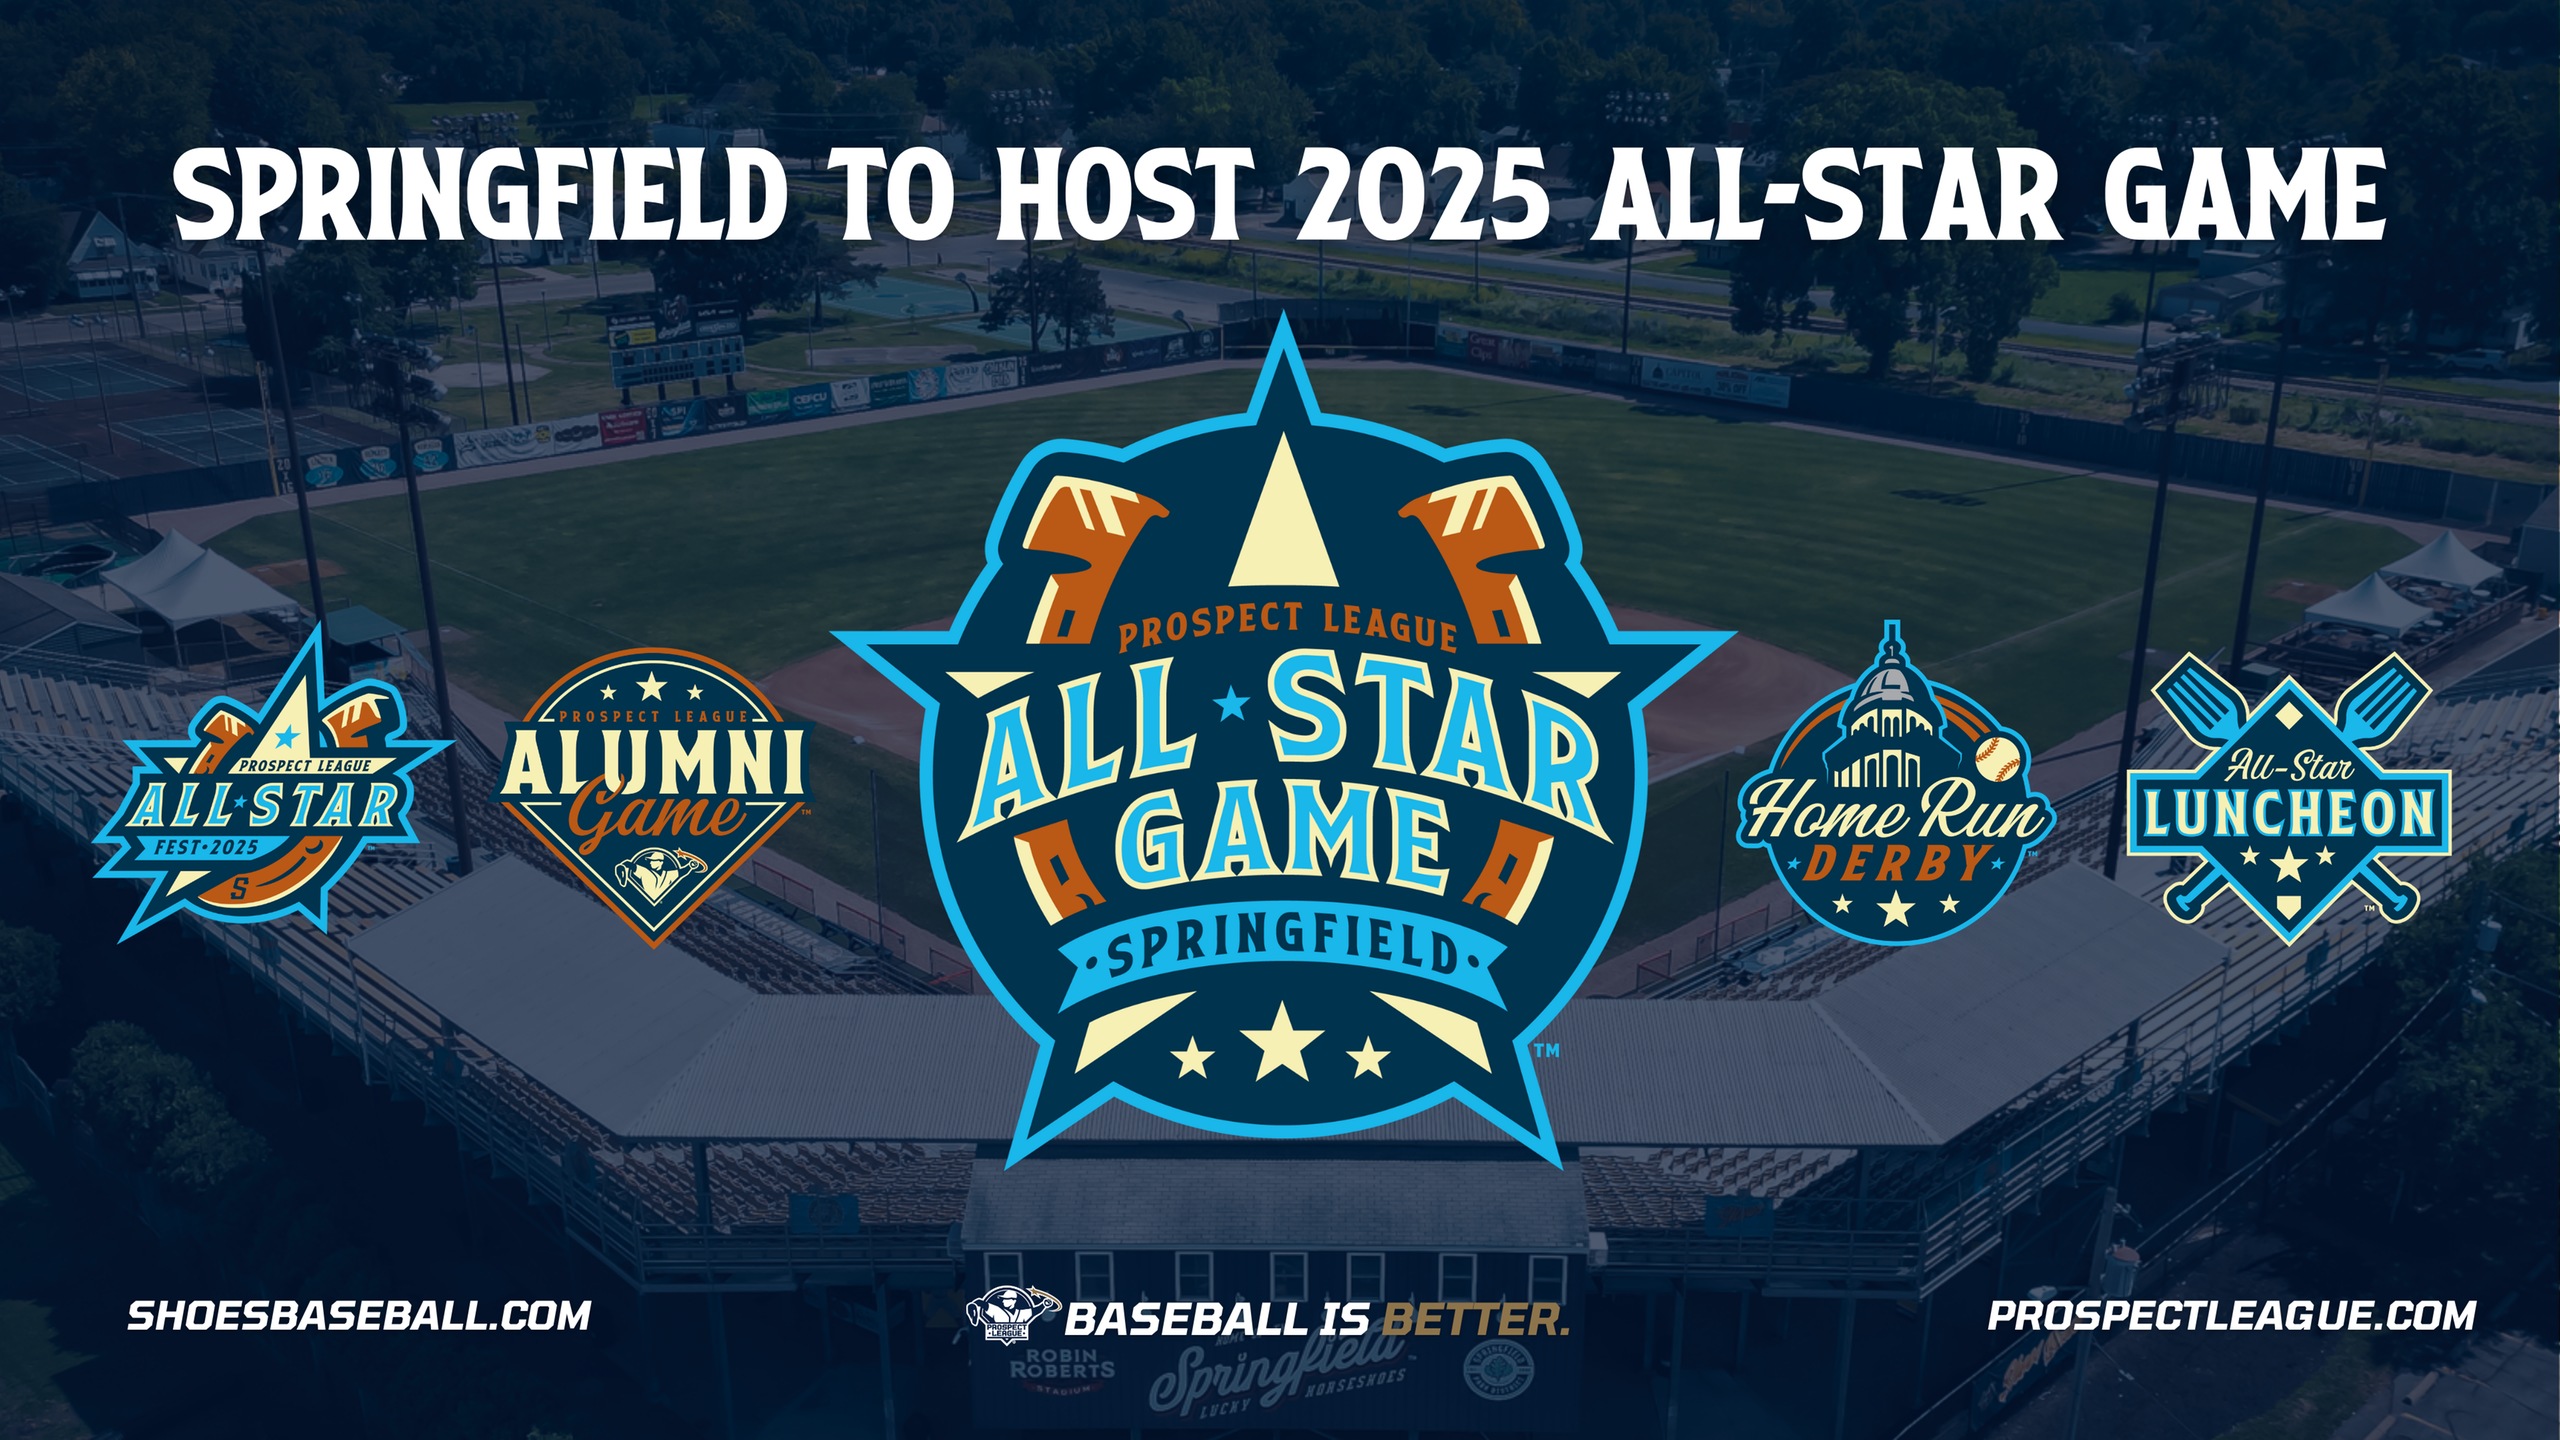 The Prospect League All-Star Game is coming to Springfield, Illinois